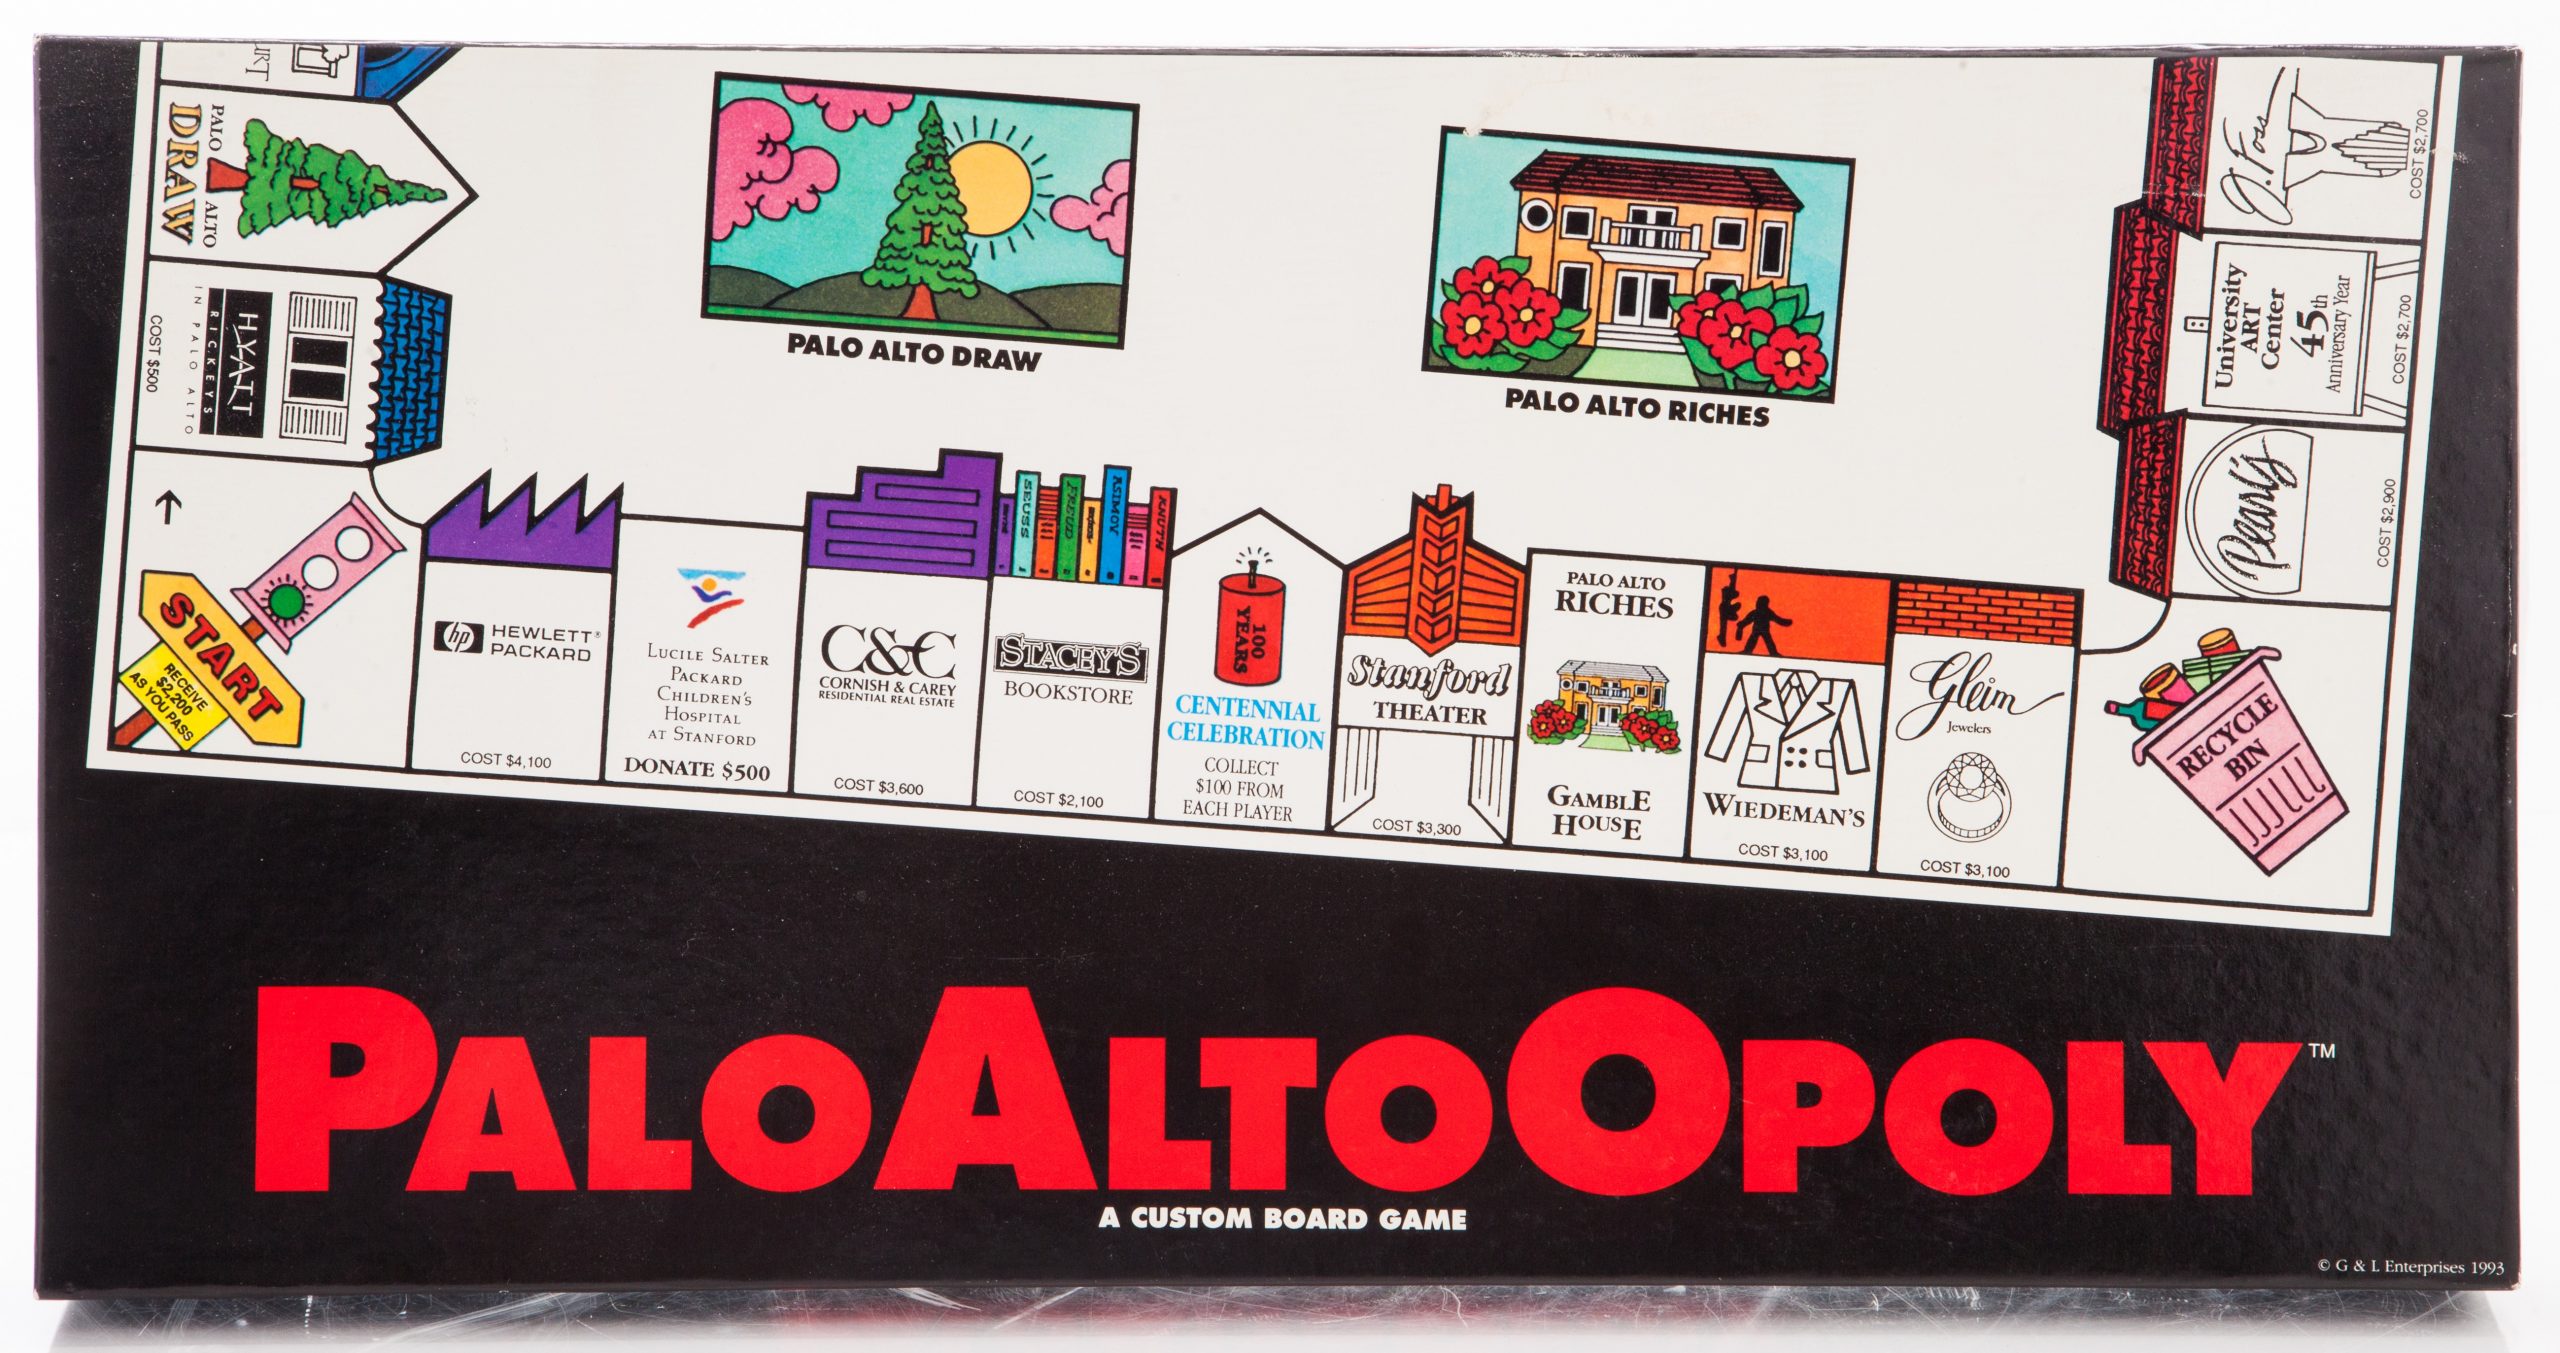 Copy of the box for the PaloAltoOpoly board game from 1993.